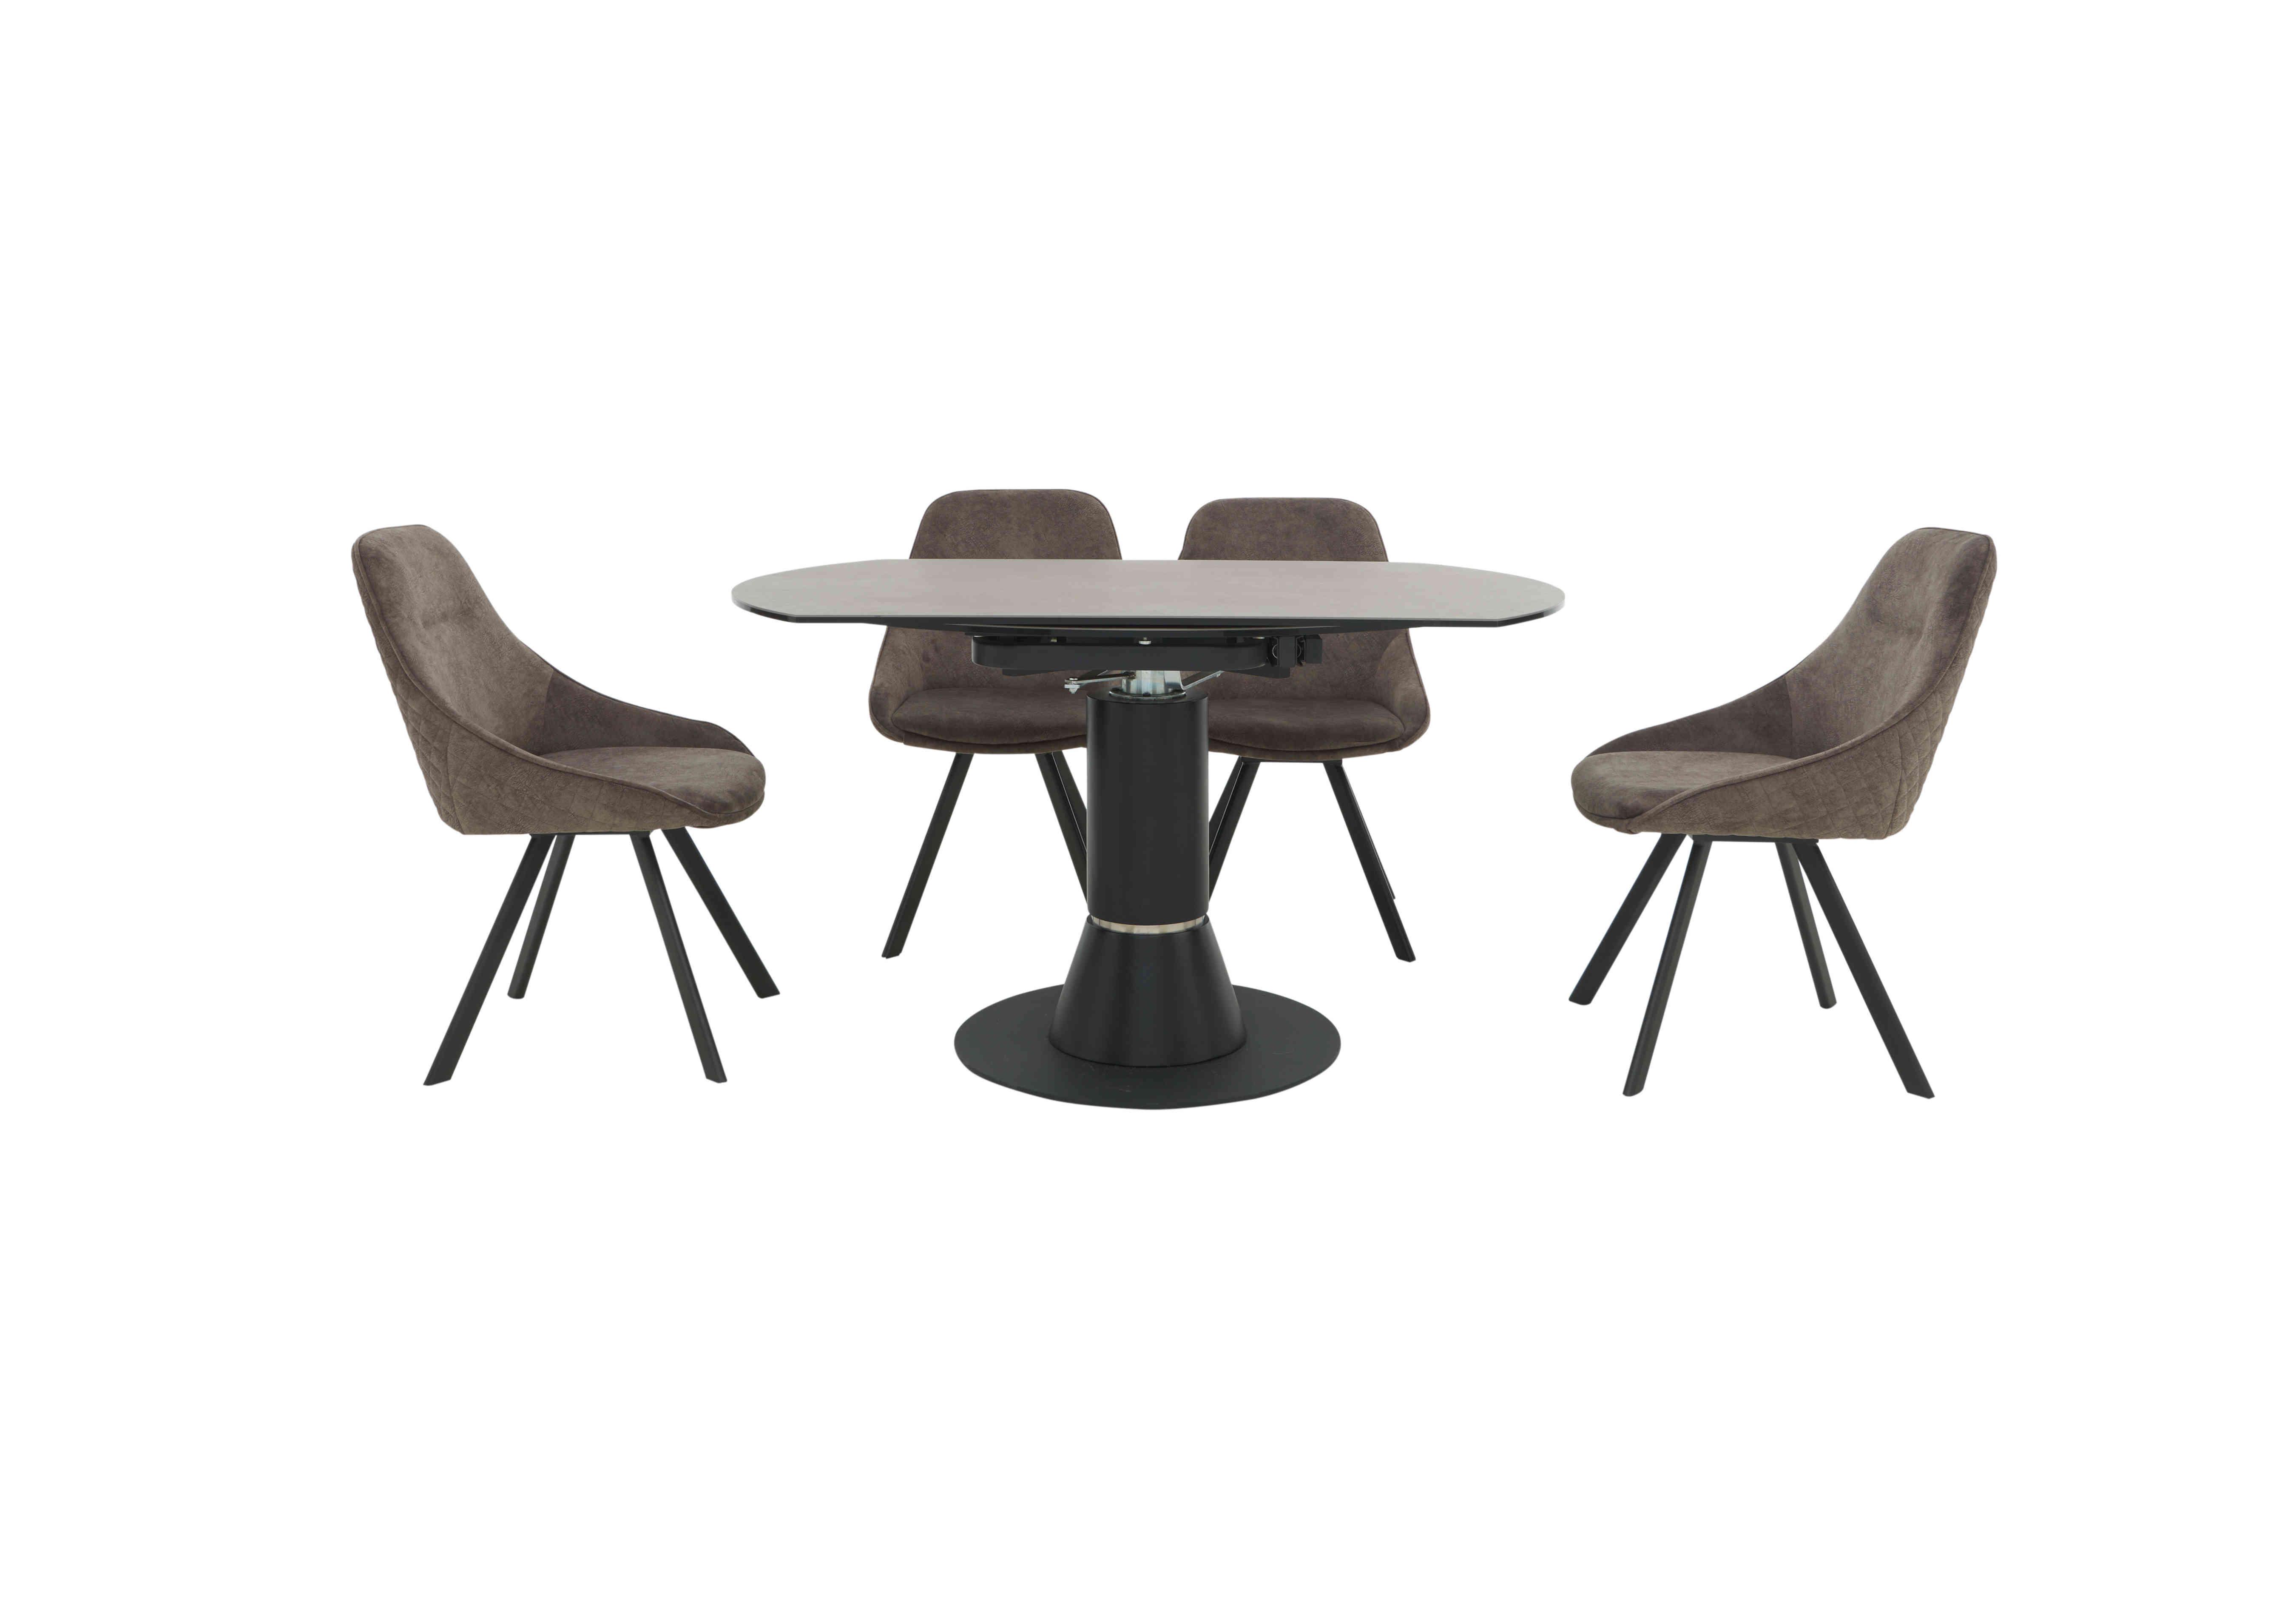 Enterprise Round Extending Dining Table and 4 Quilted Swivel Dining Chairs Dining Set in  on Furniture Village